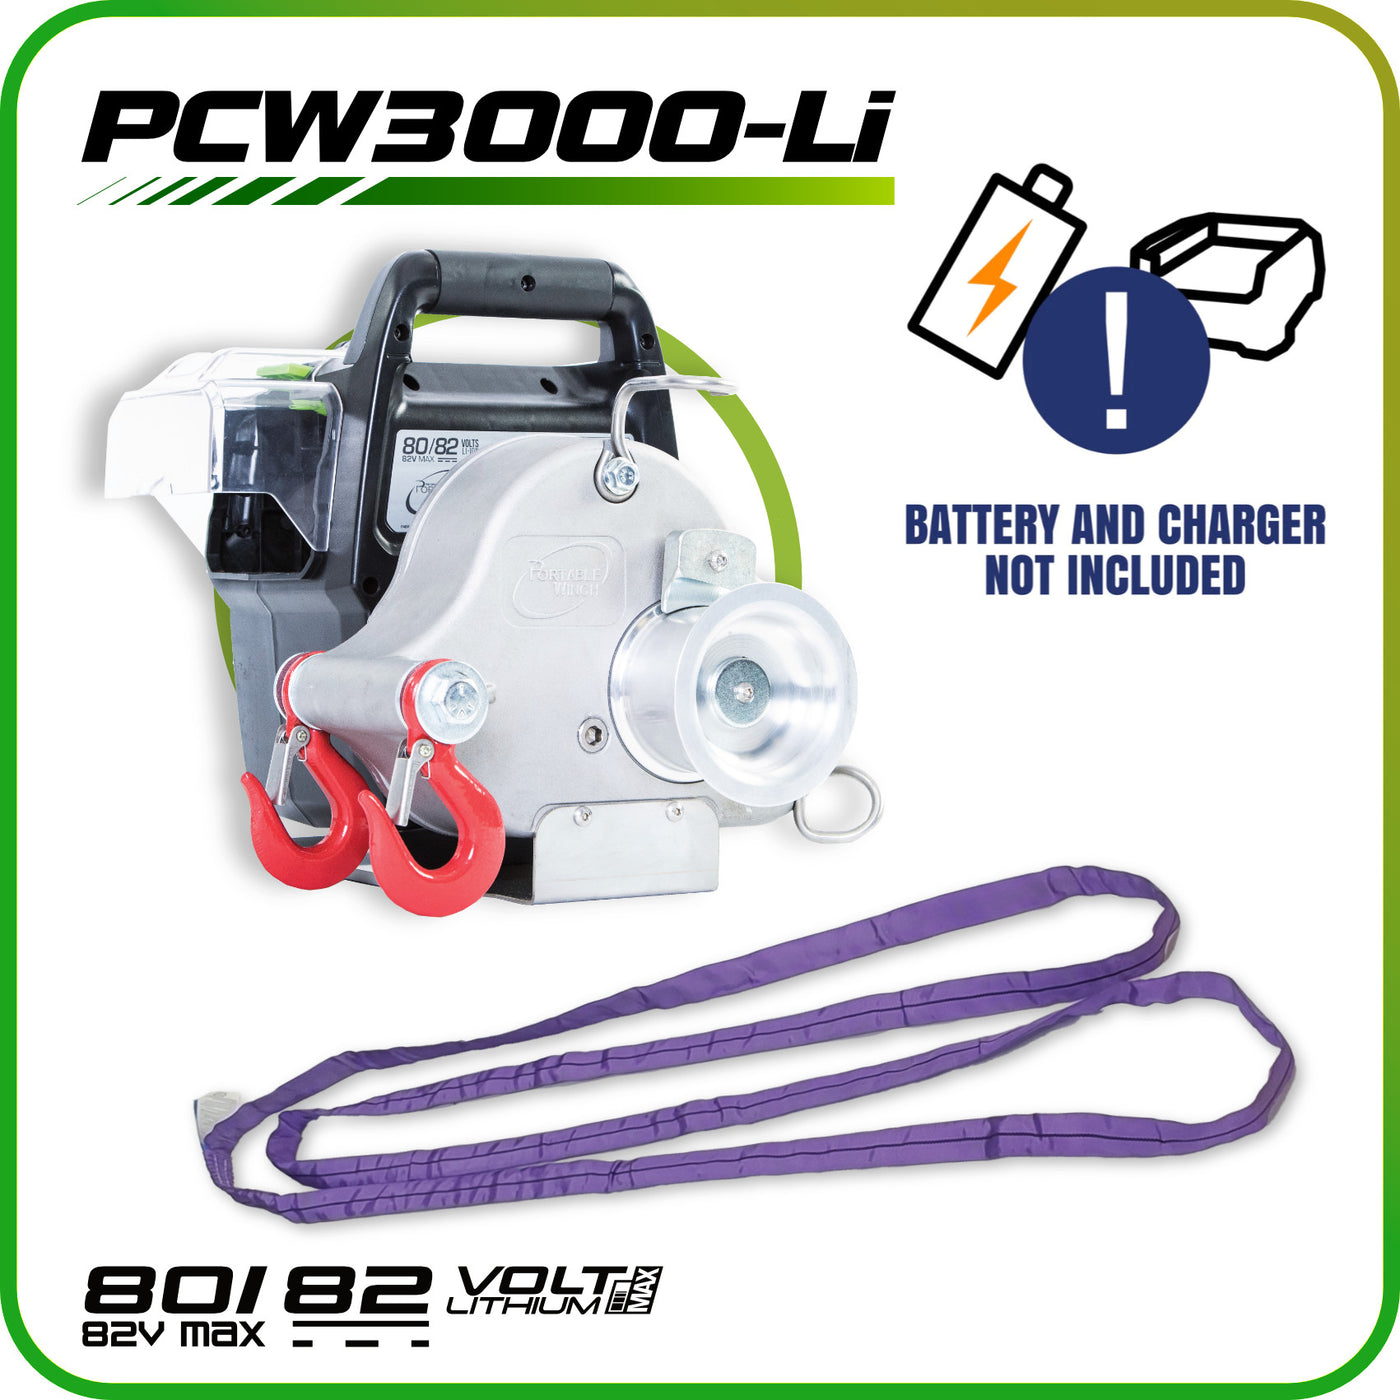 Treuil PCW3000 PORTABLE WINCH chasse et loisirs